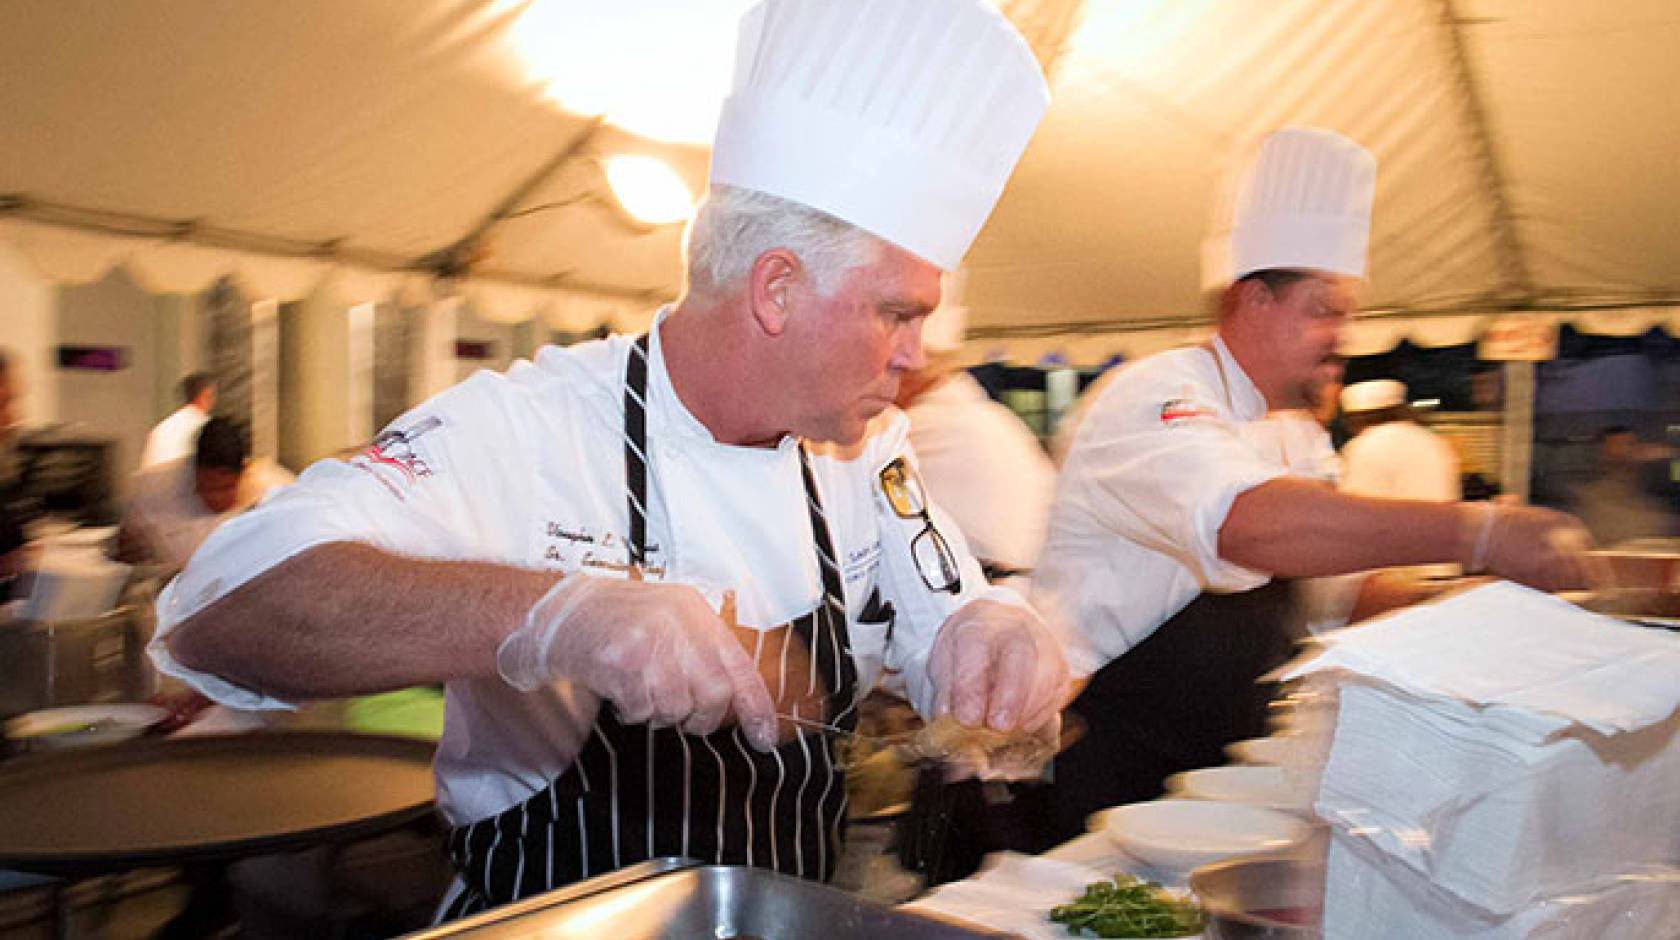 Executive chef Vaughn Vargus, with assistance from UC San Diego chefs Dave Gardinier of Café Ventanas and Tiago Battastini of 64 Degrees, donated his time and culinary talents at the 3rd Annual Foodtasia Gala at the San Diego Food Bank, held Saturday, May